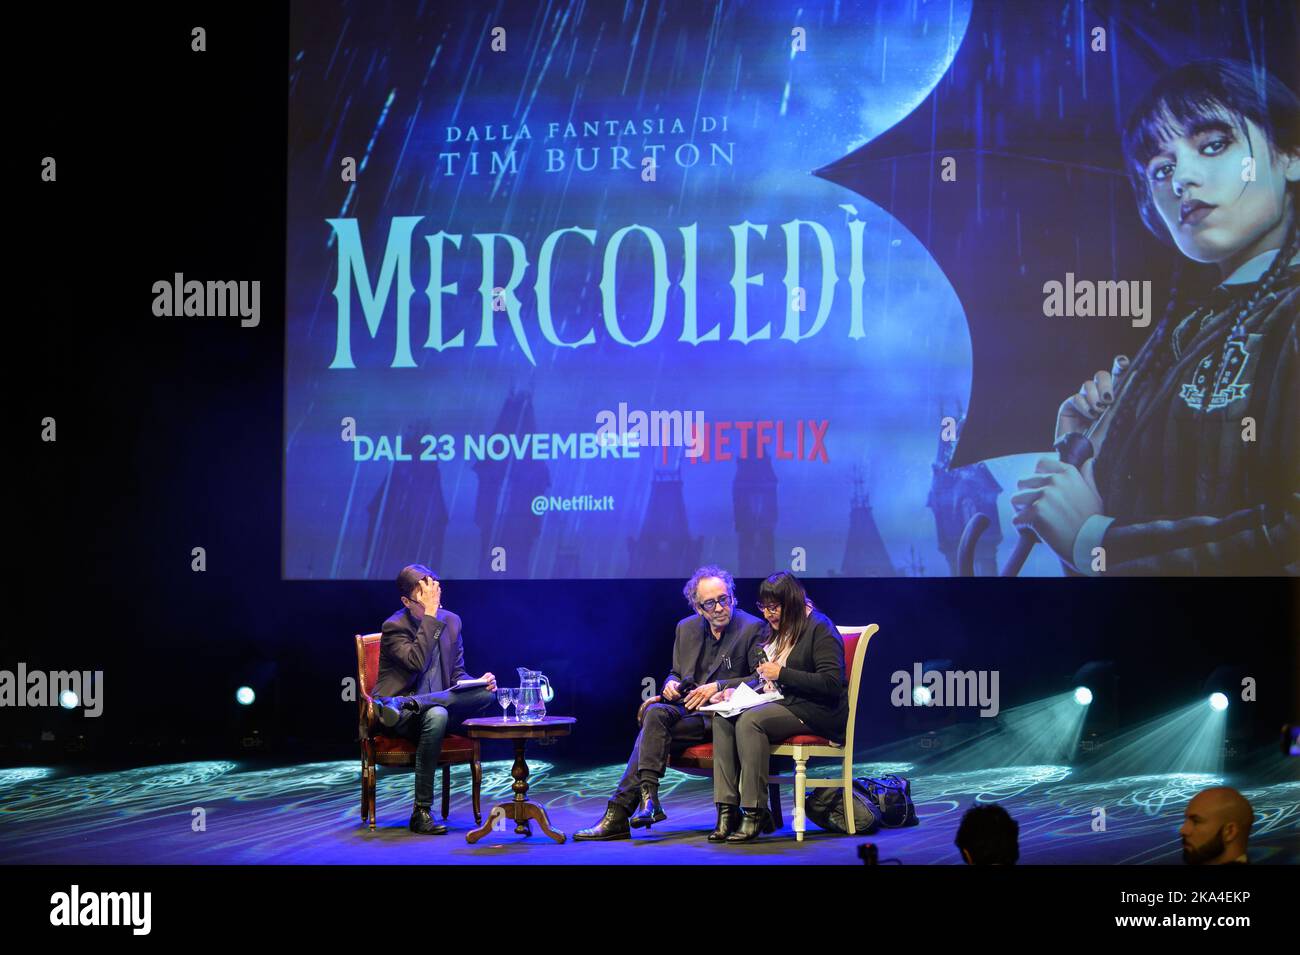 Lucca, Italy. 31st Oct, 2022. Lucca, Italy - October 31, 2022: Tim Burton presents the European fan screening of the netflix TV series Wednesday at lucca comics and games. In the photo Tim Burton Credit: Stefano Dalle Luche/Alamy Live News Stock Photo